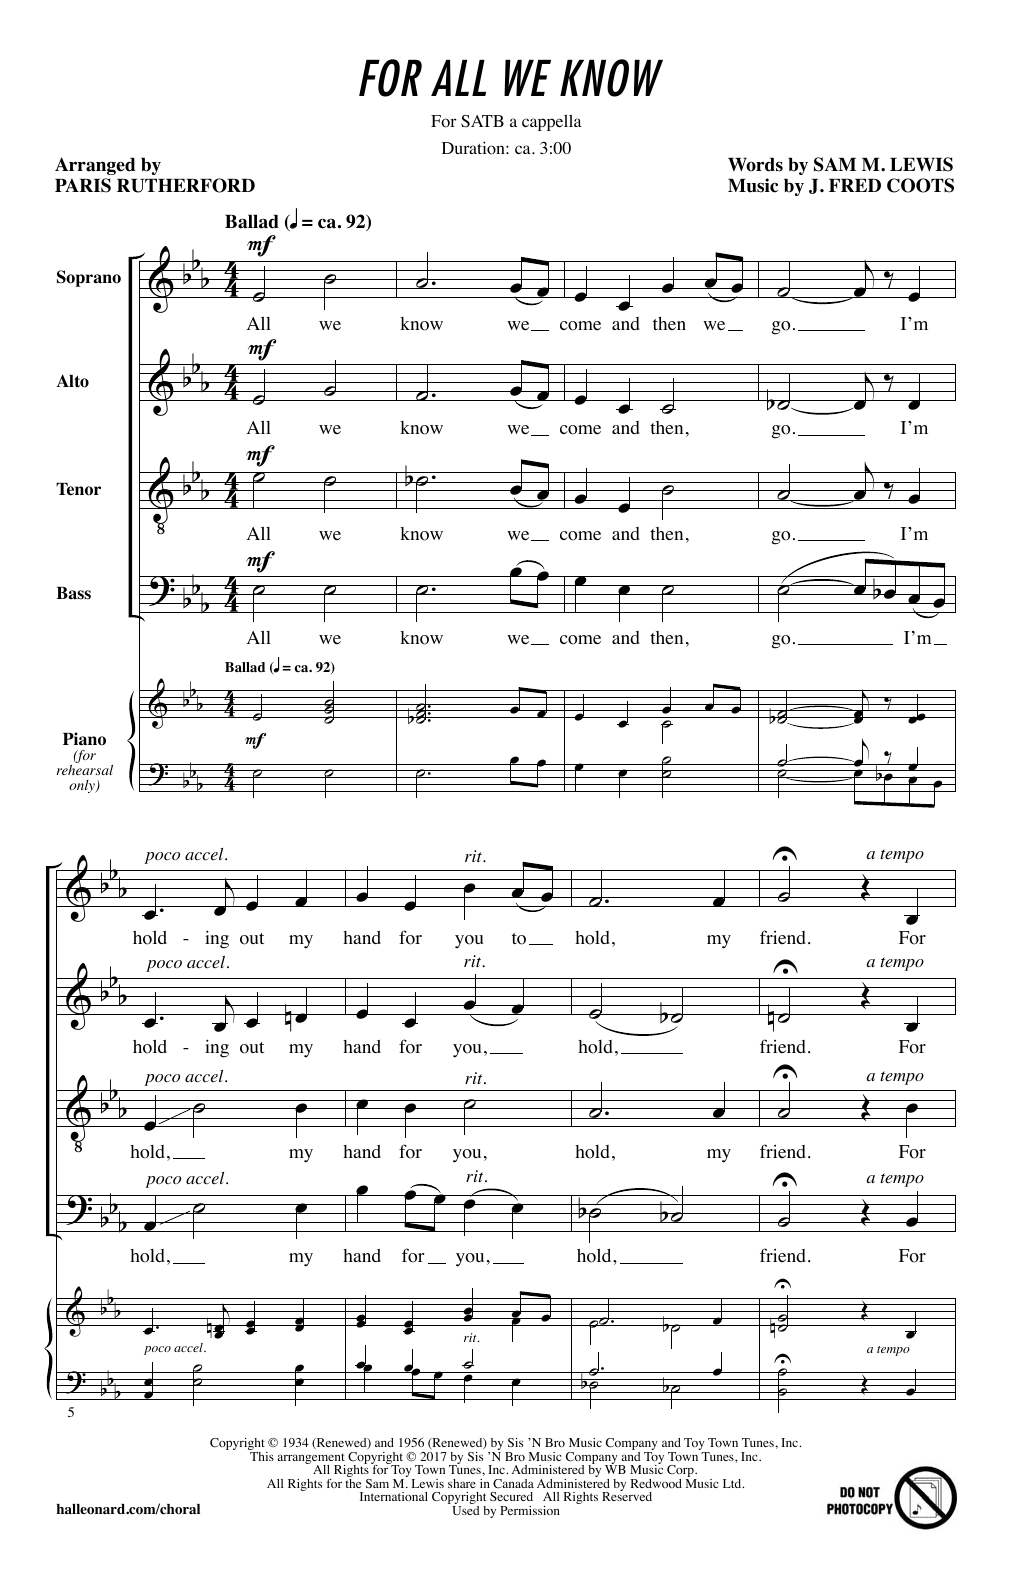 Download Paris Rutherford For All We Know Sheet Music